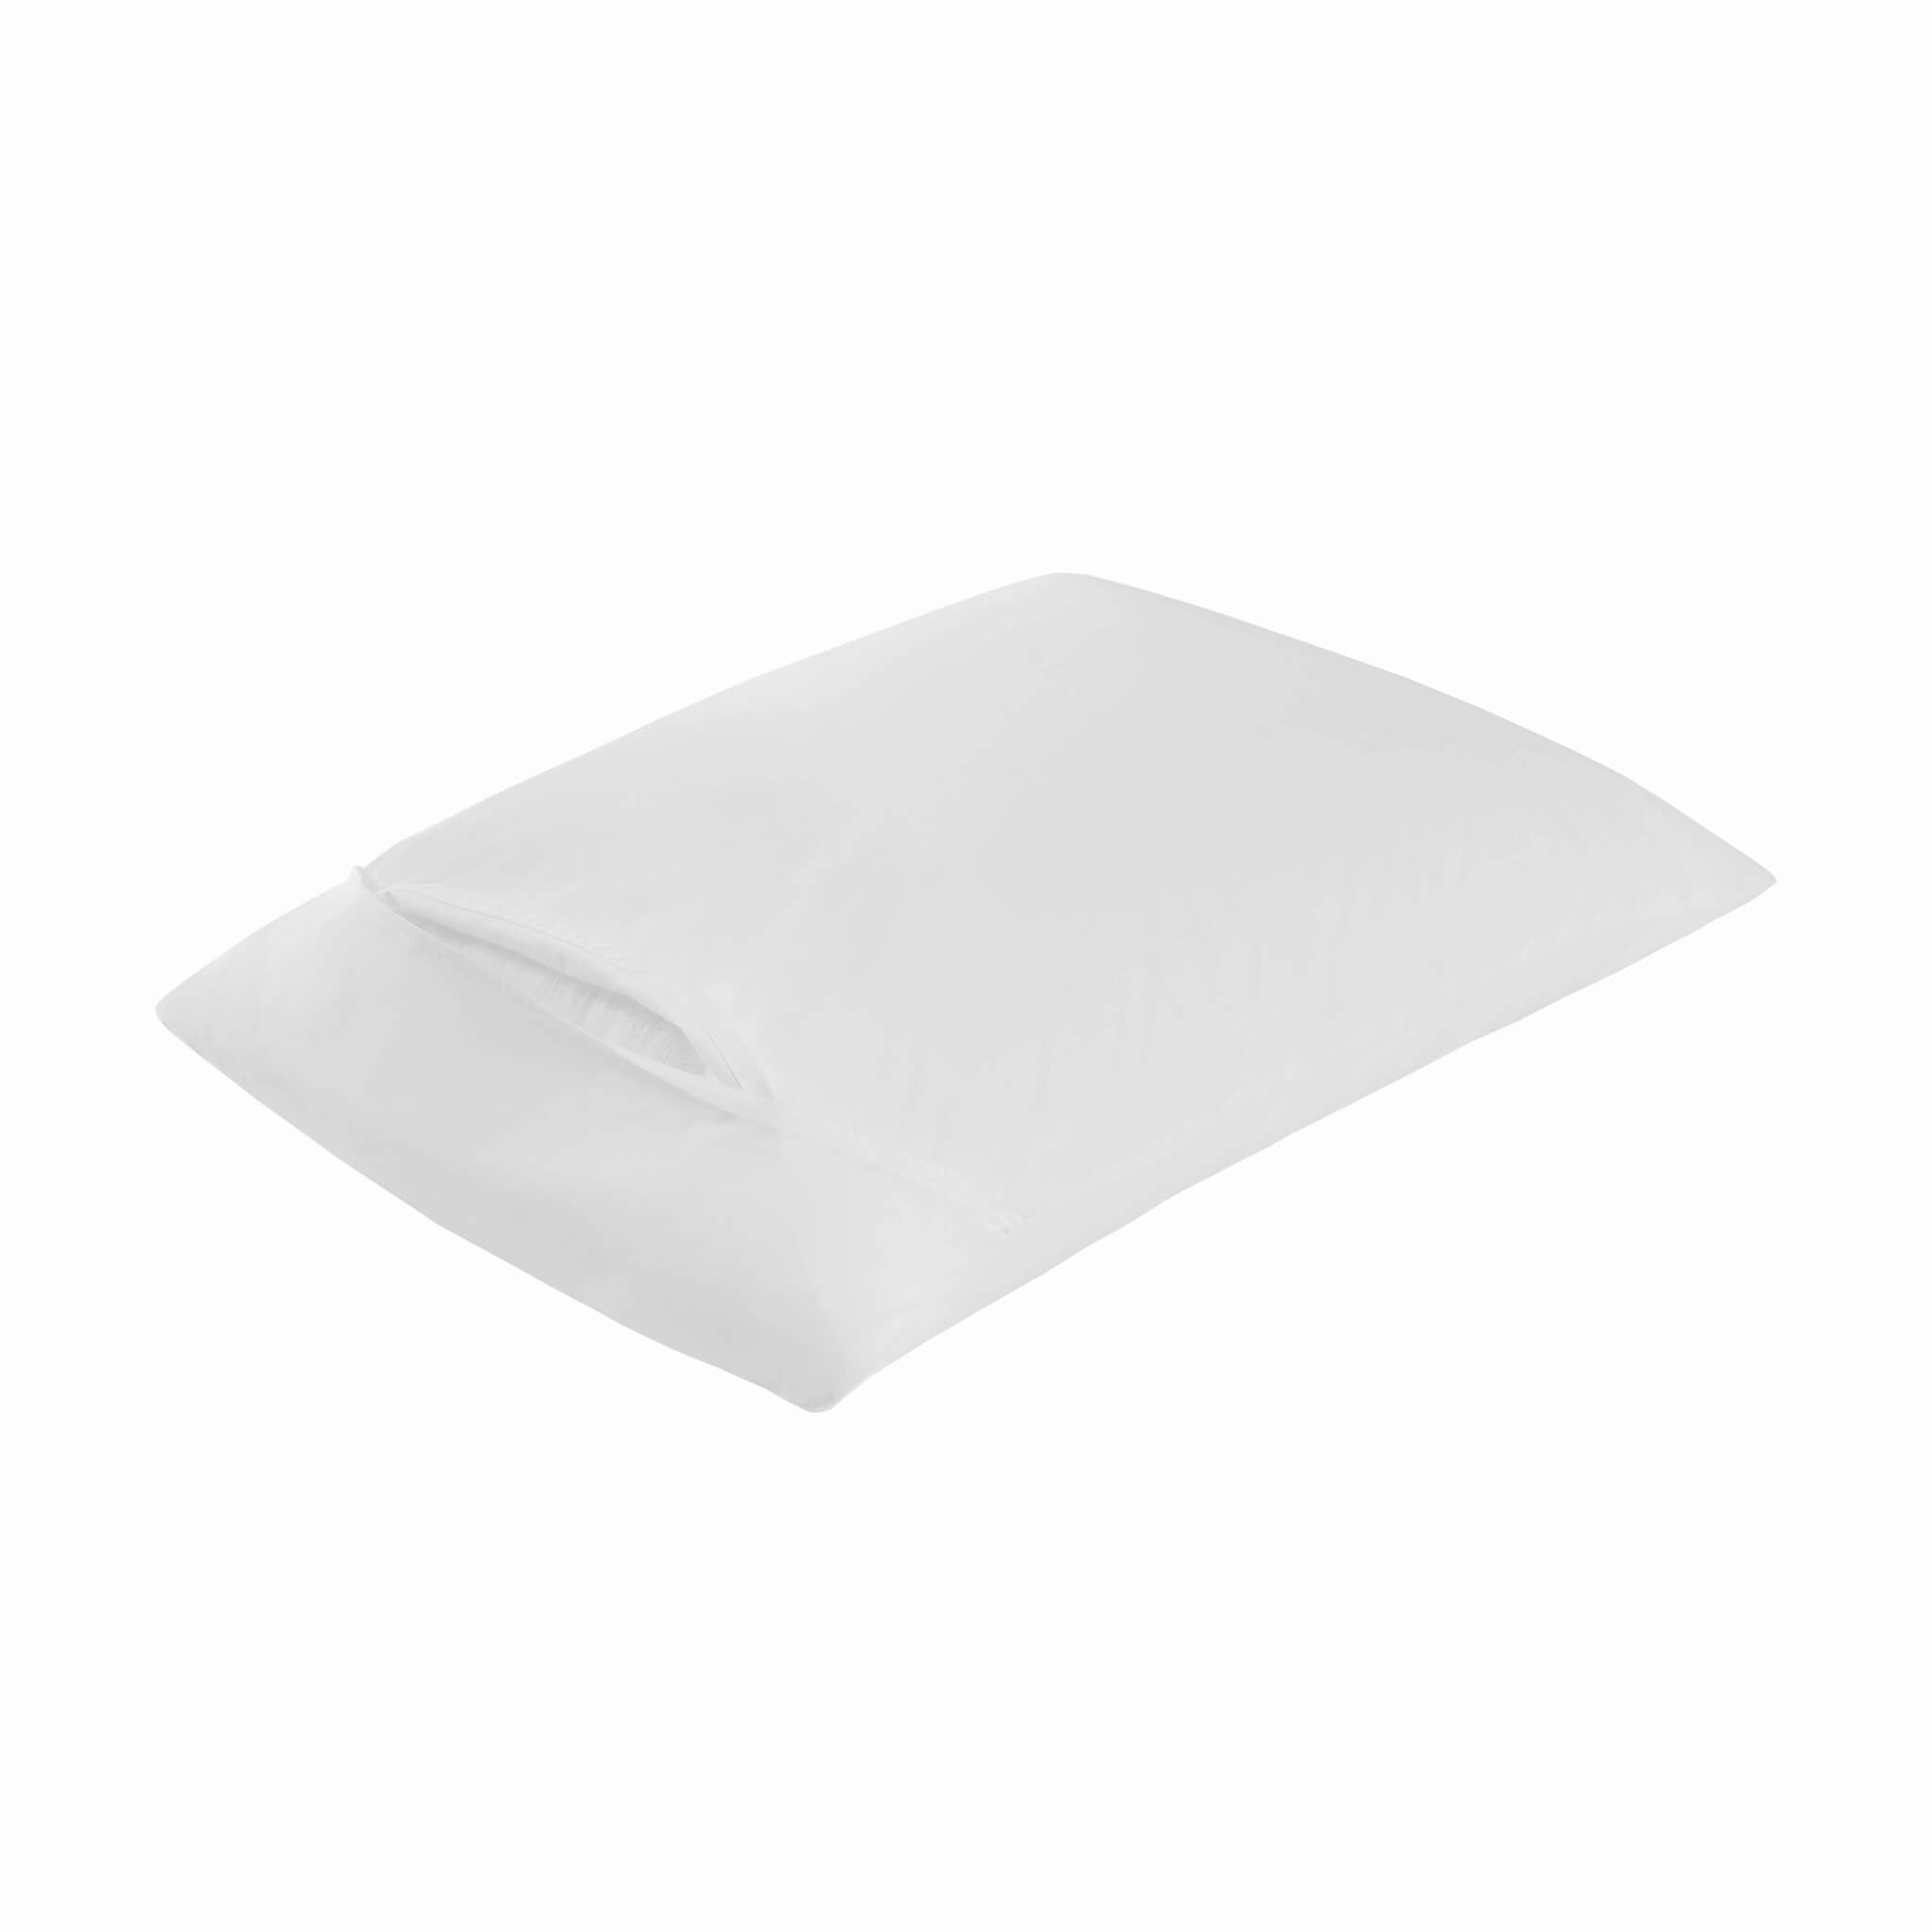 Bed Bug Proof Polyester Tricot Pillow Encasement | Zippered or Envelope Style Pillow Protector Bargoose Home Textiles, Inc. Standard Envelope (21x27) 